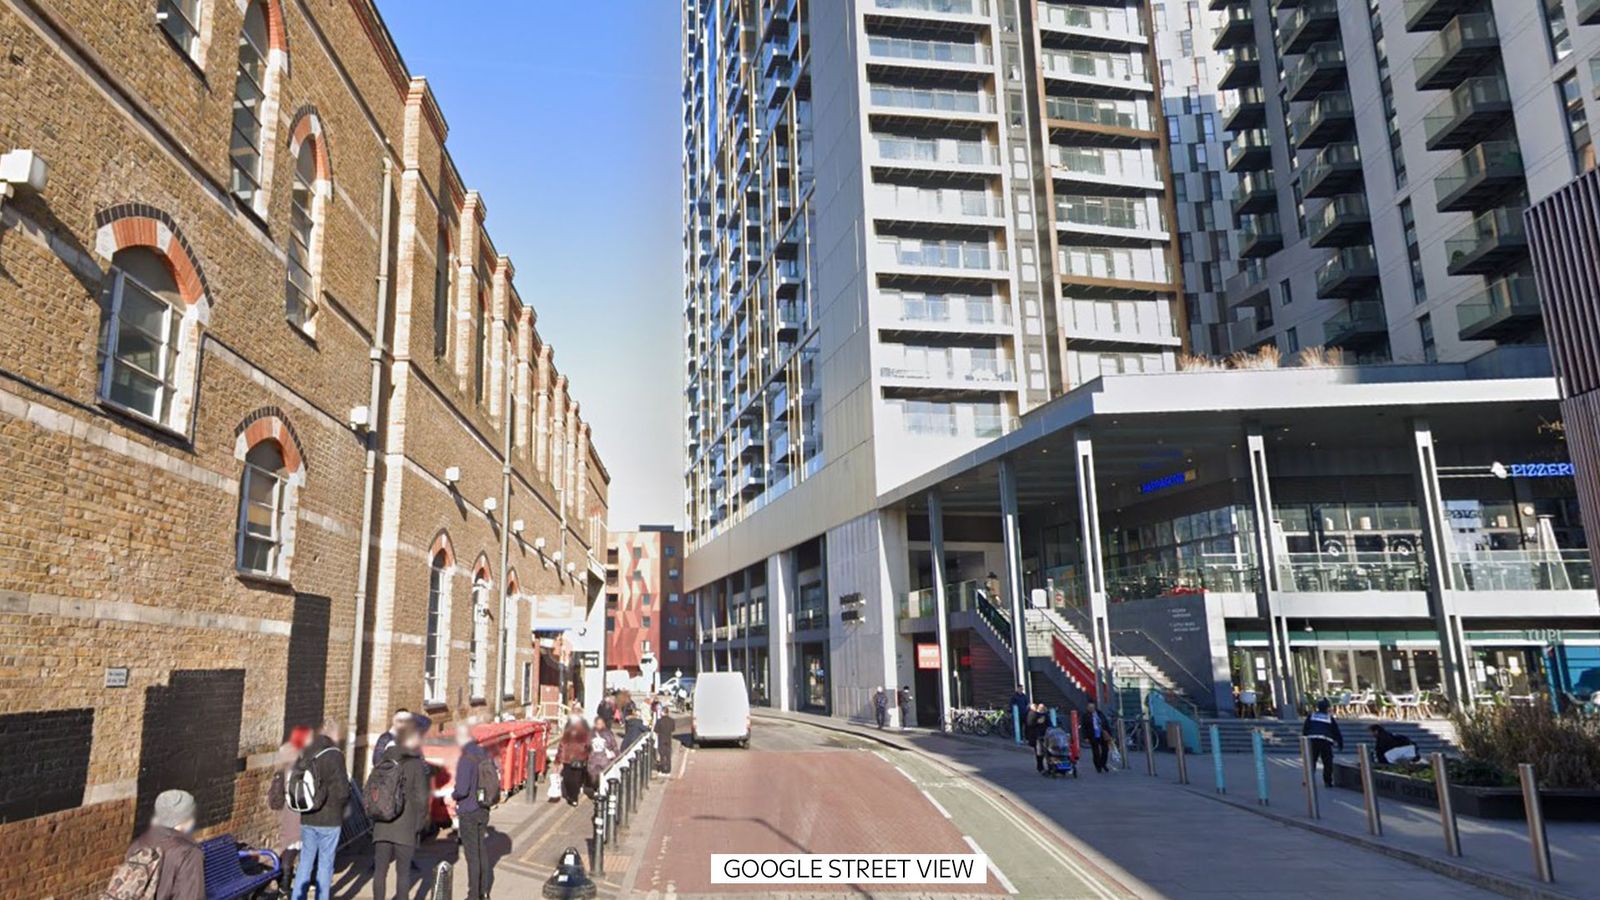 Murder probe after woman, 27, dies at London block of flats and man found dead hours later